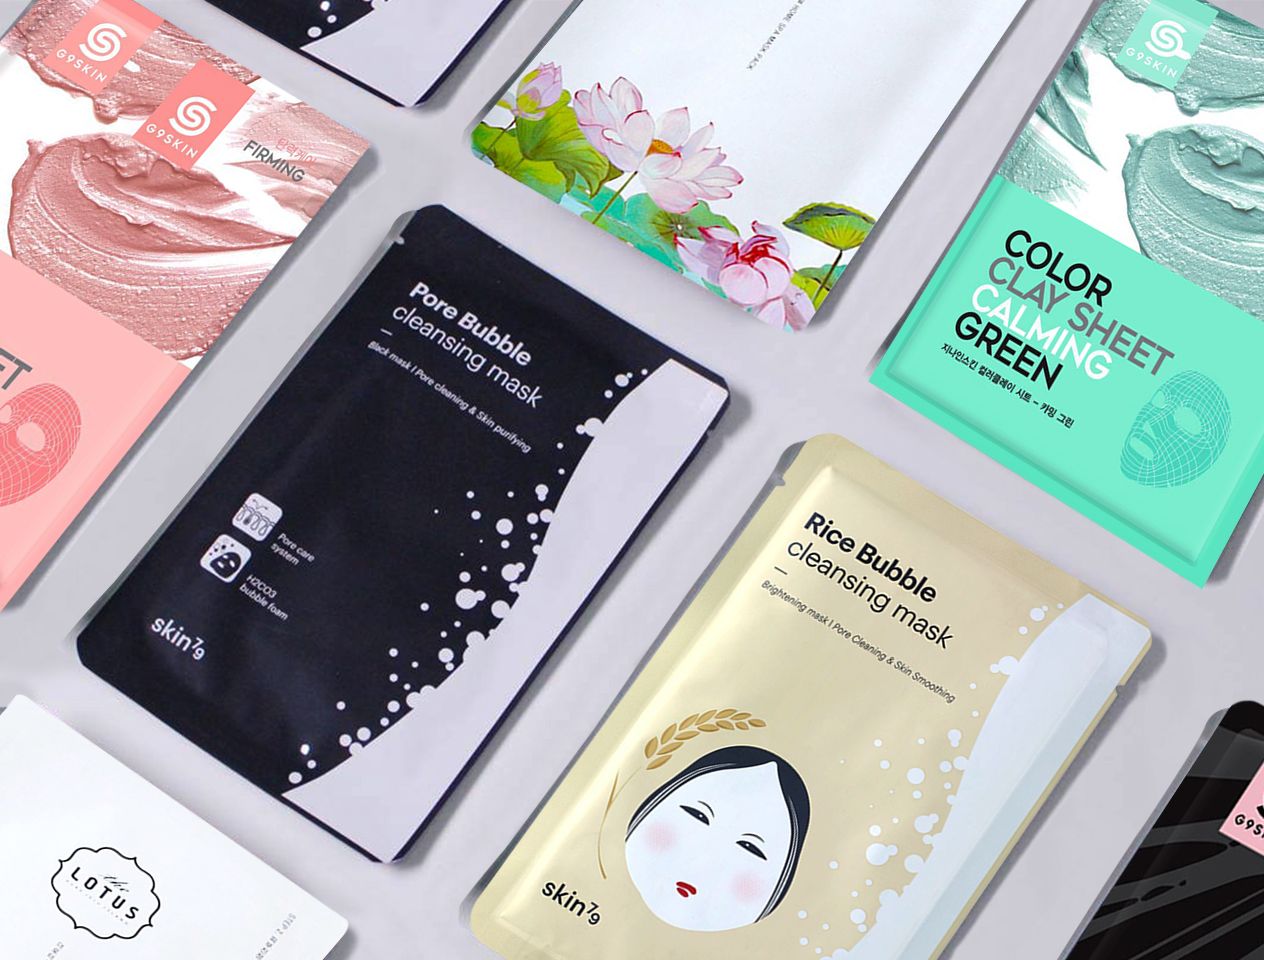 New Korean beauty products